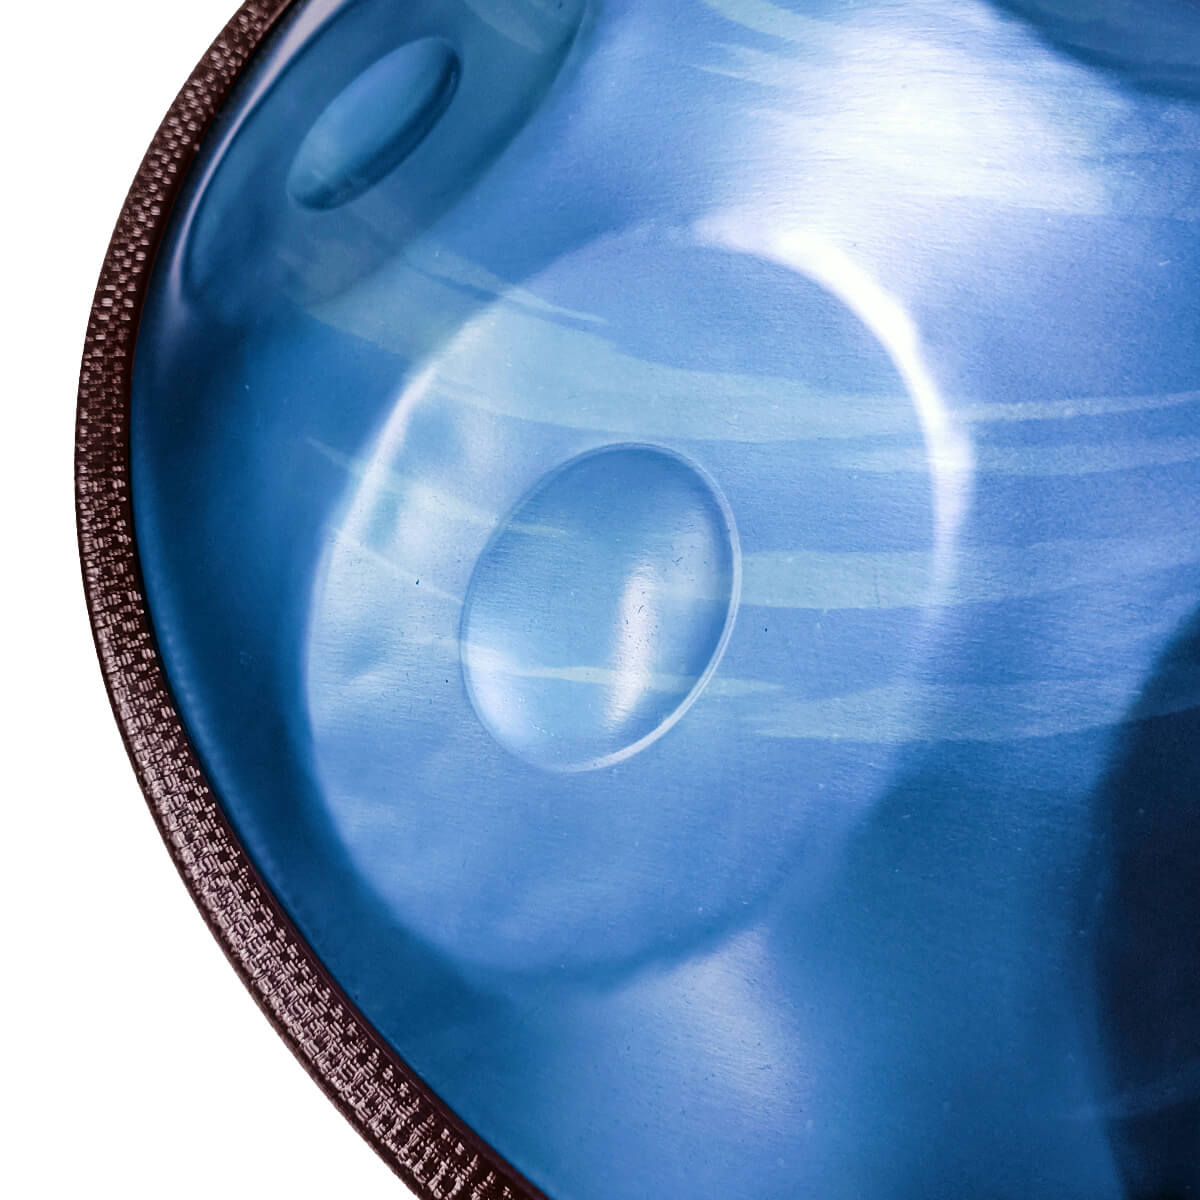 AS TEMAN Handpan Black-Hole 10 Notes D Minor Scale Blue hangdrum with gift set